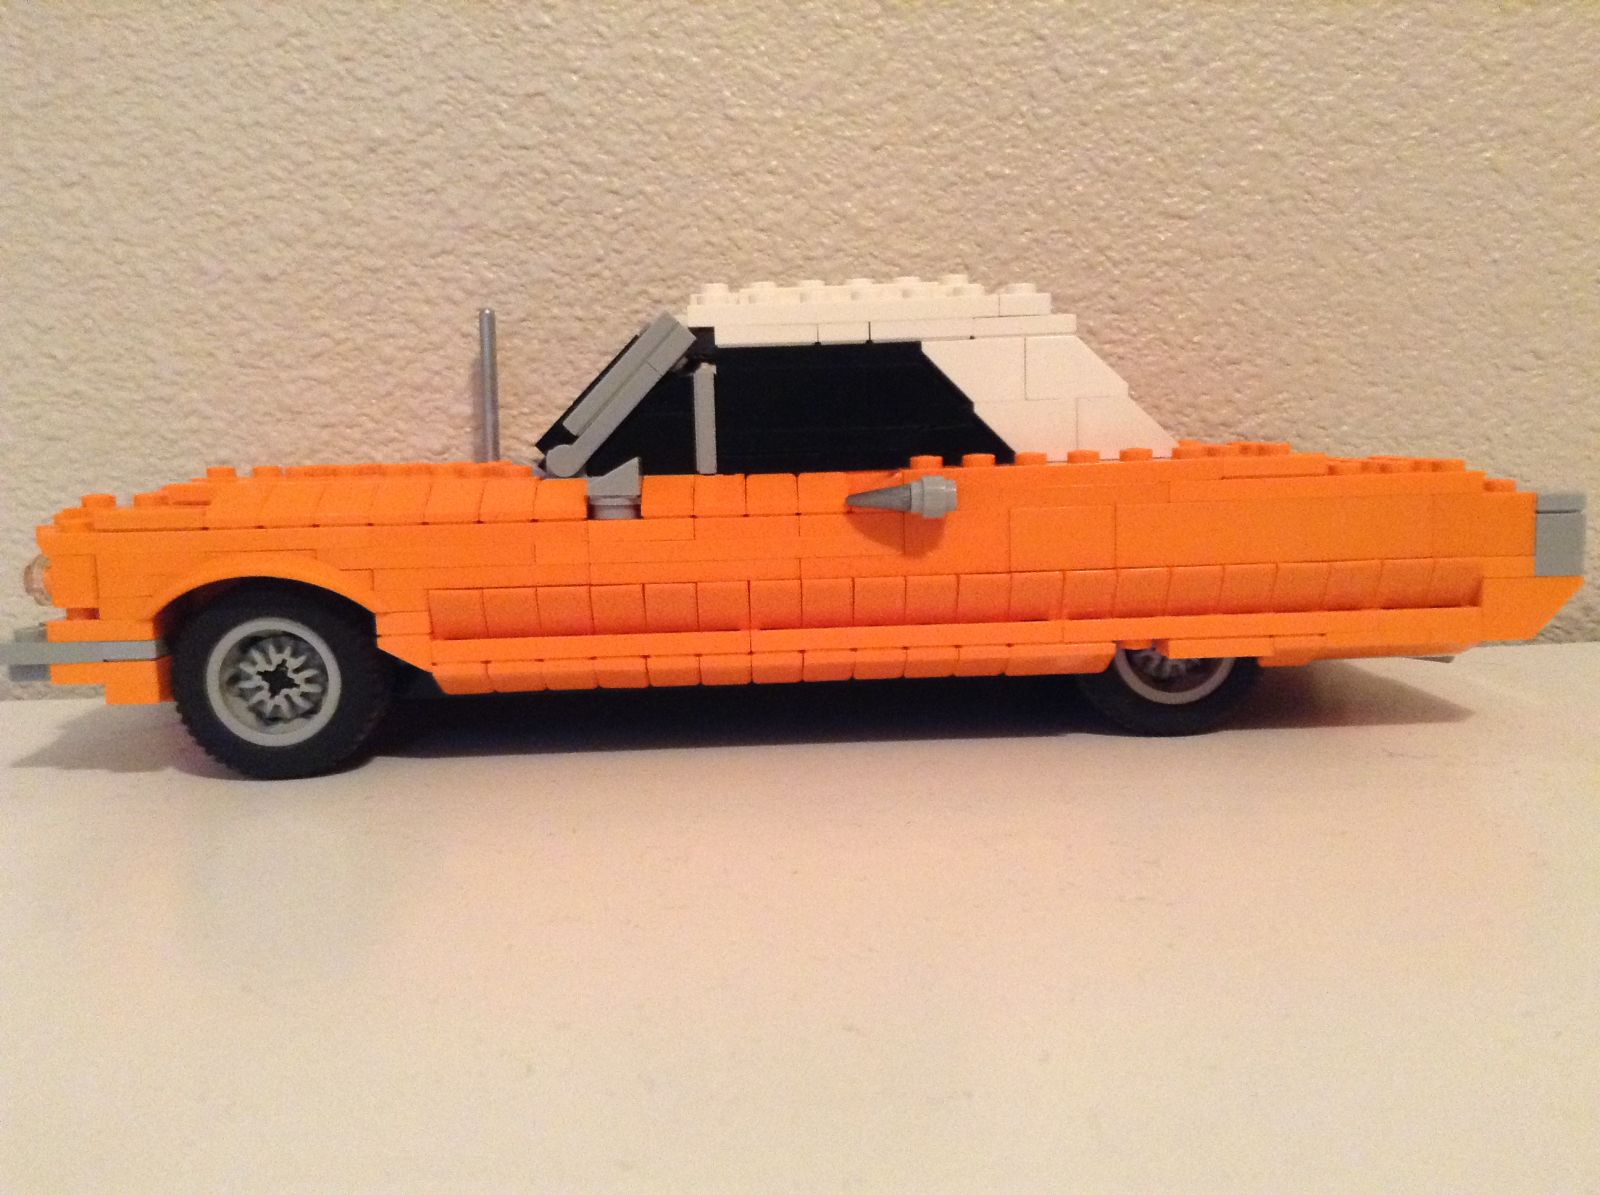 Illustration for article titled Ive recreated my car in Lego.